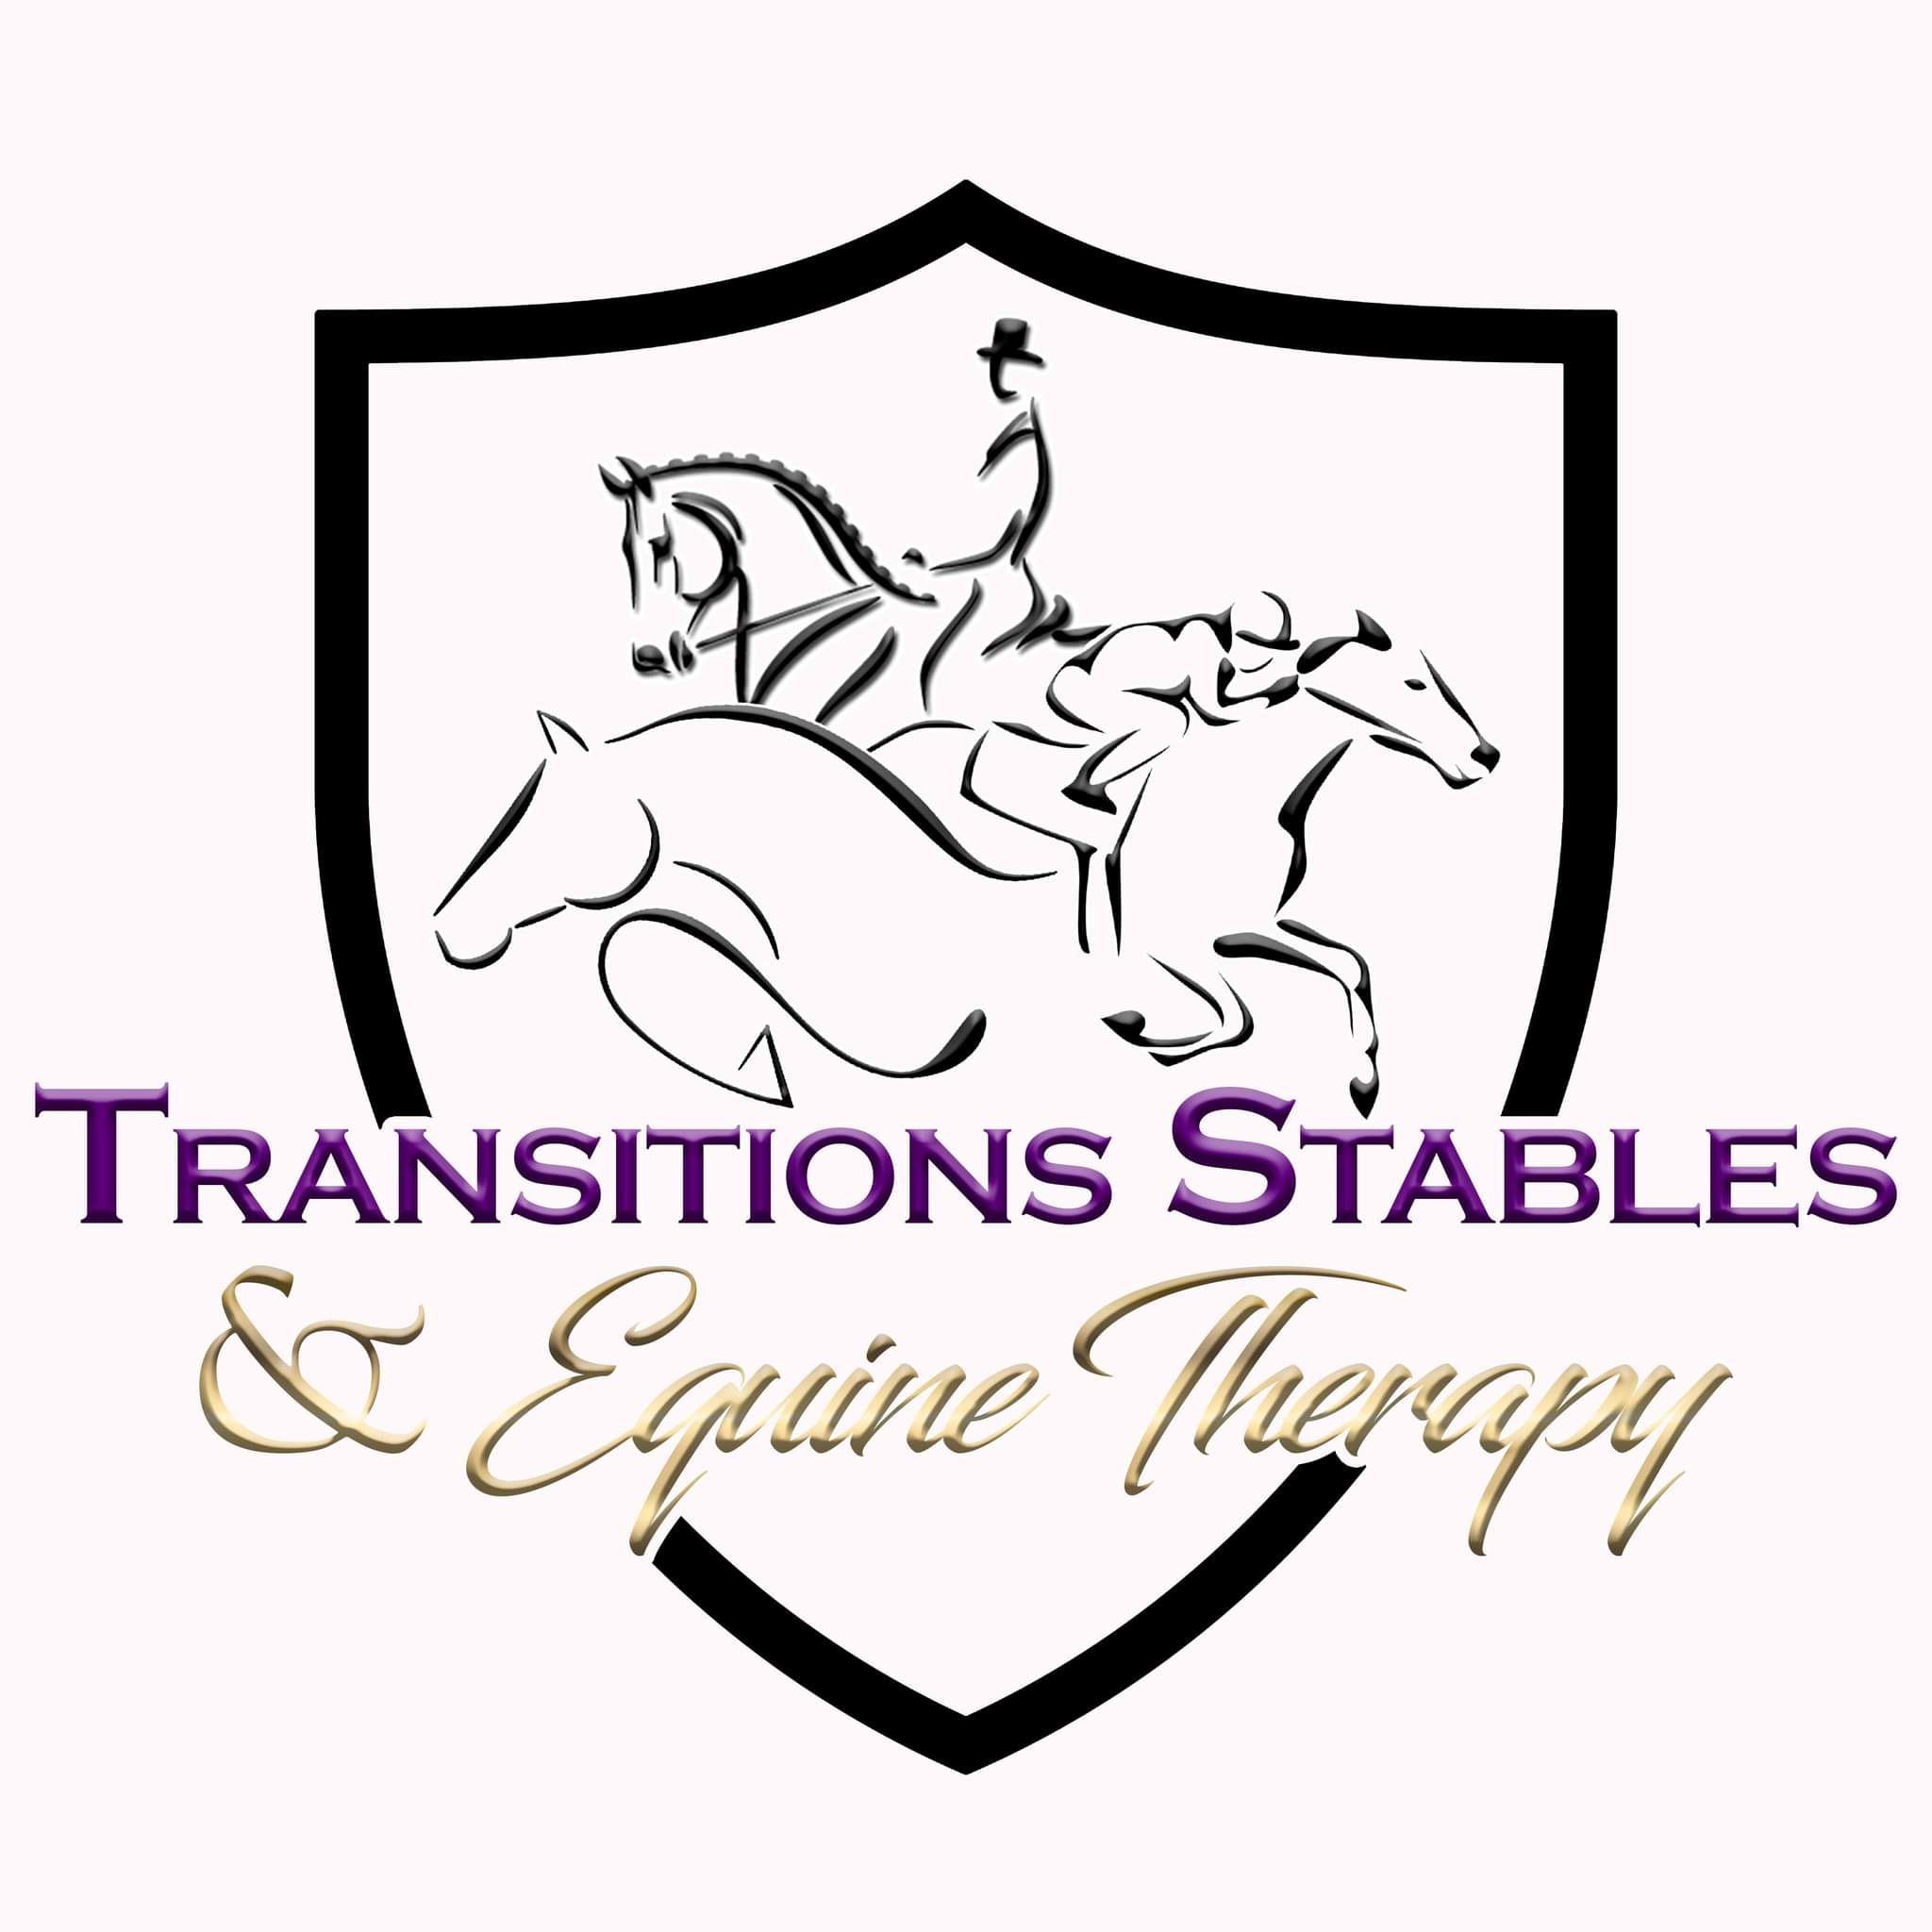 Transitions Stables and Equine Therapy of Virginia Inc logo